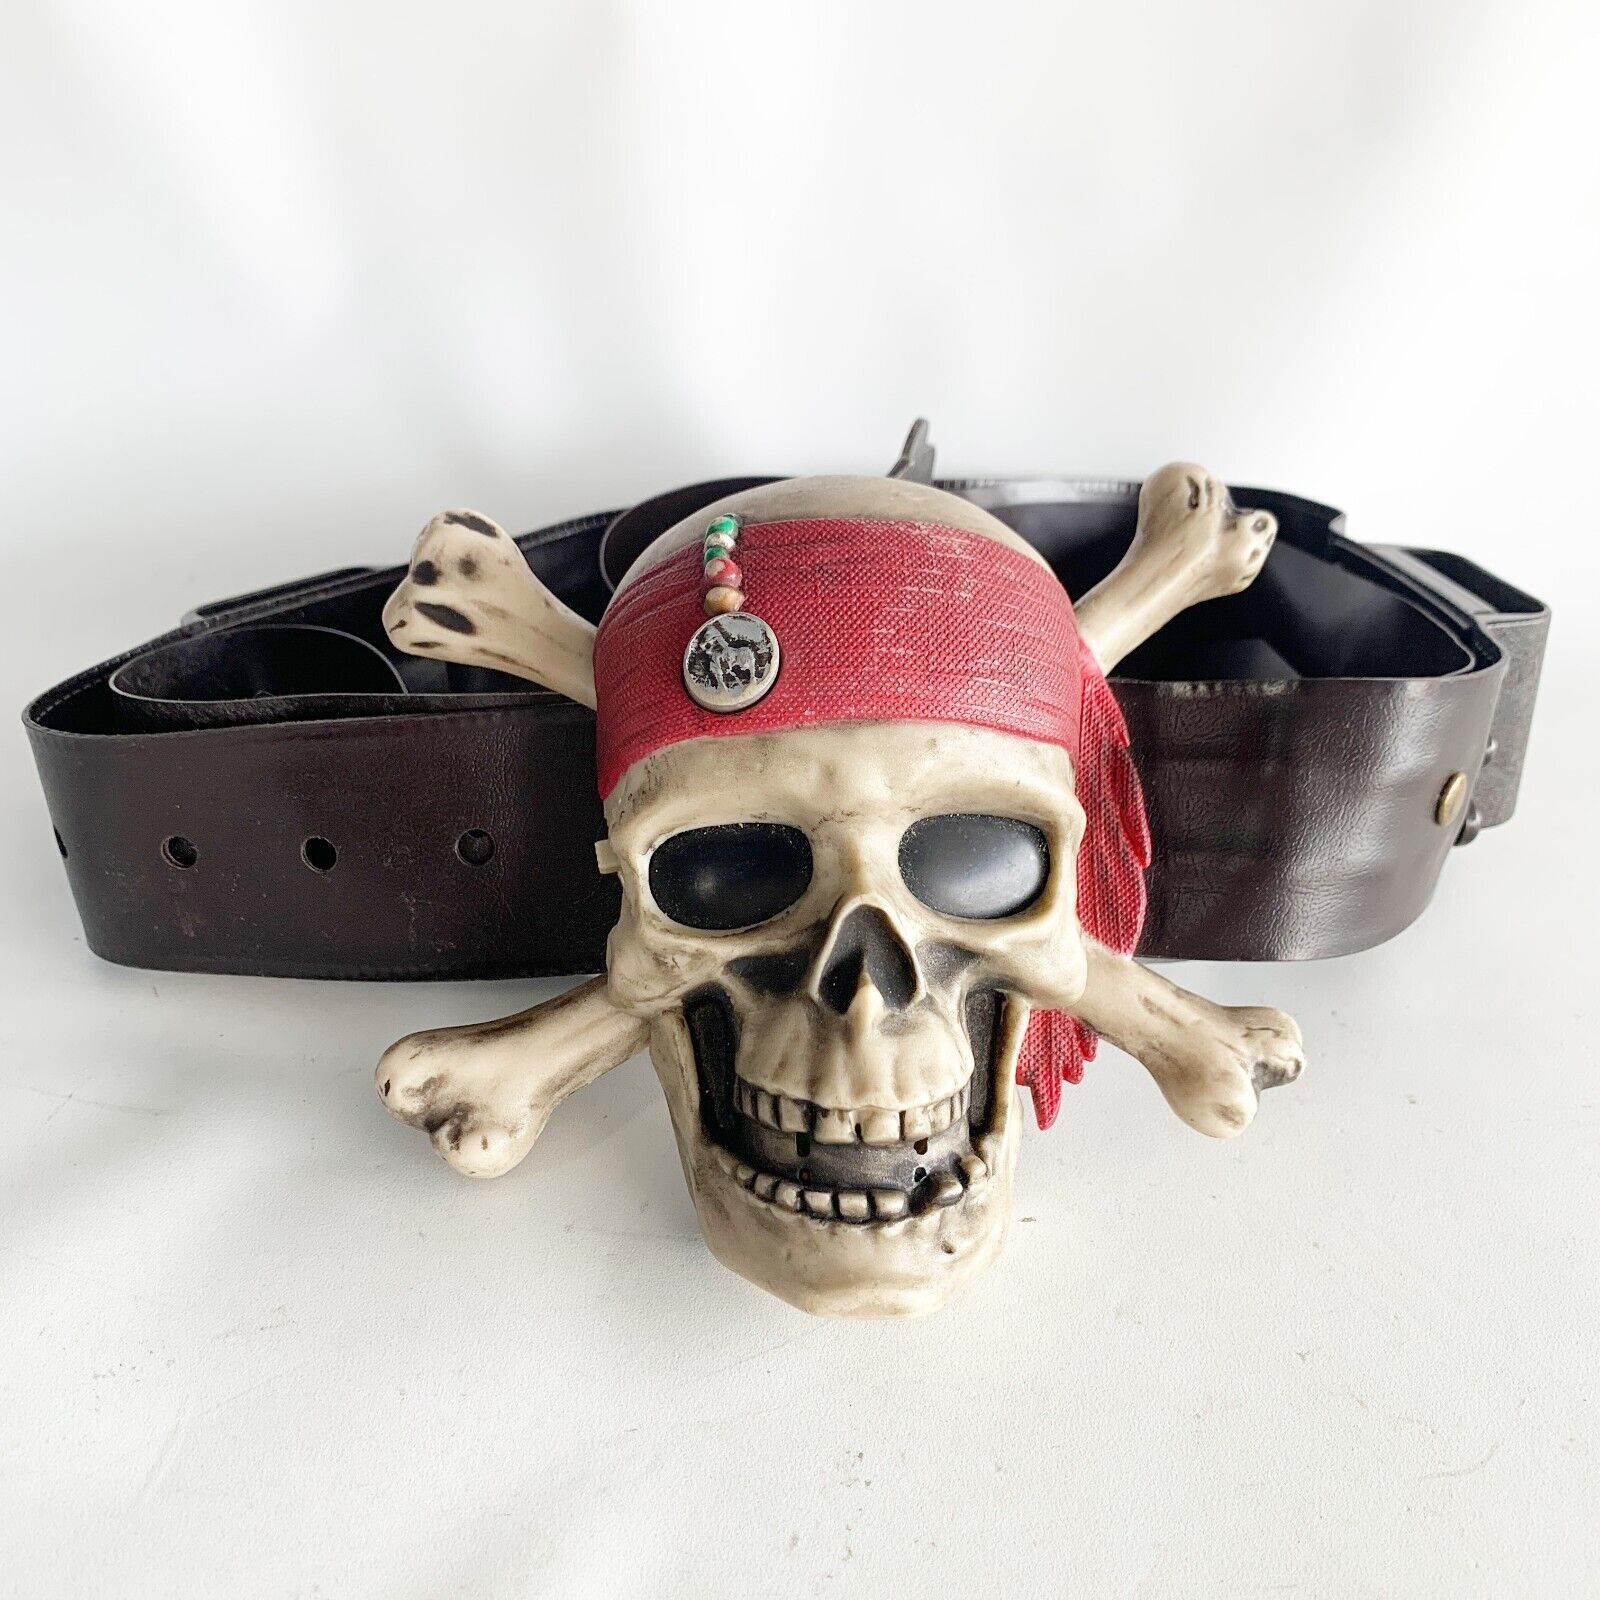 Pirates of the Caribbean Talking Skull Belt Zizzle Jack Sparrow WORKS See VIDEO